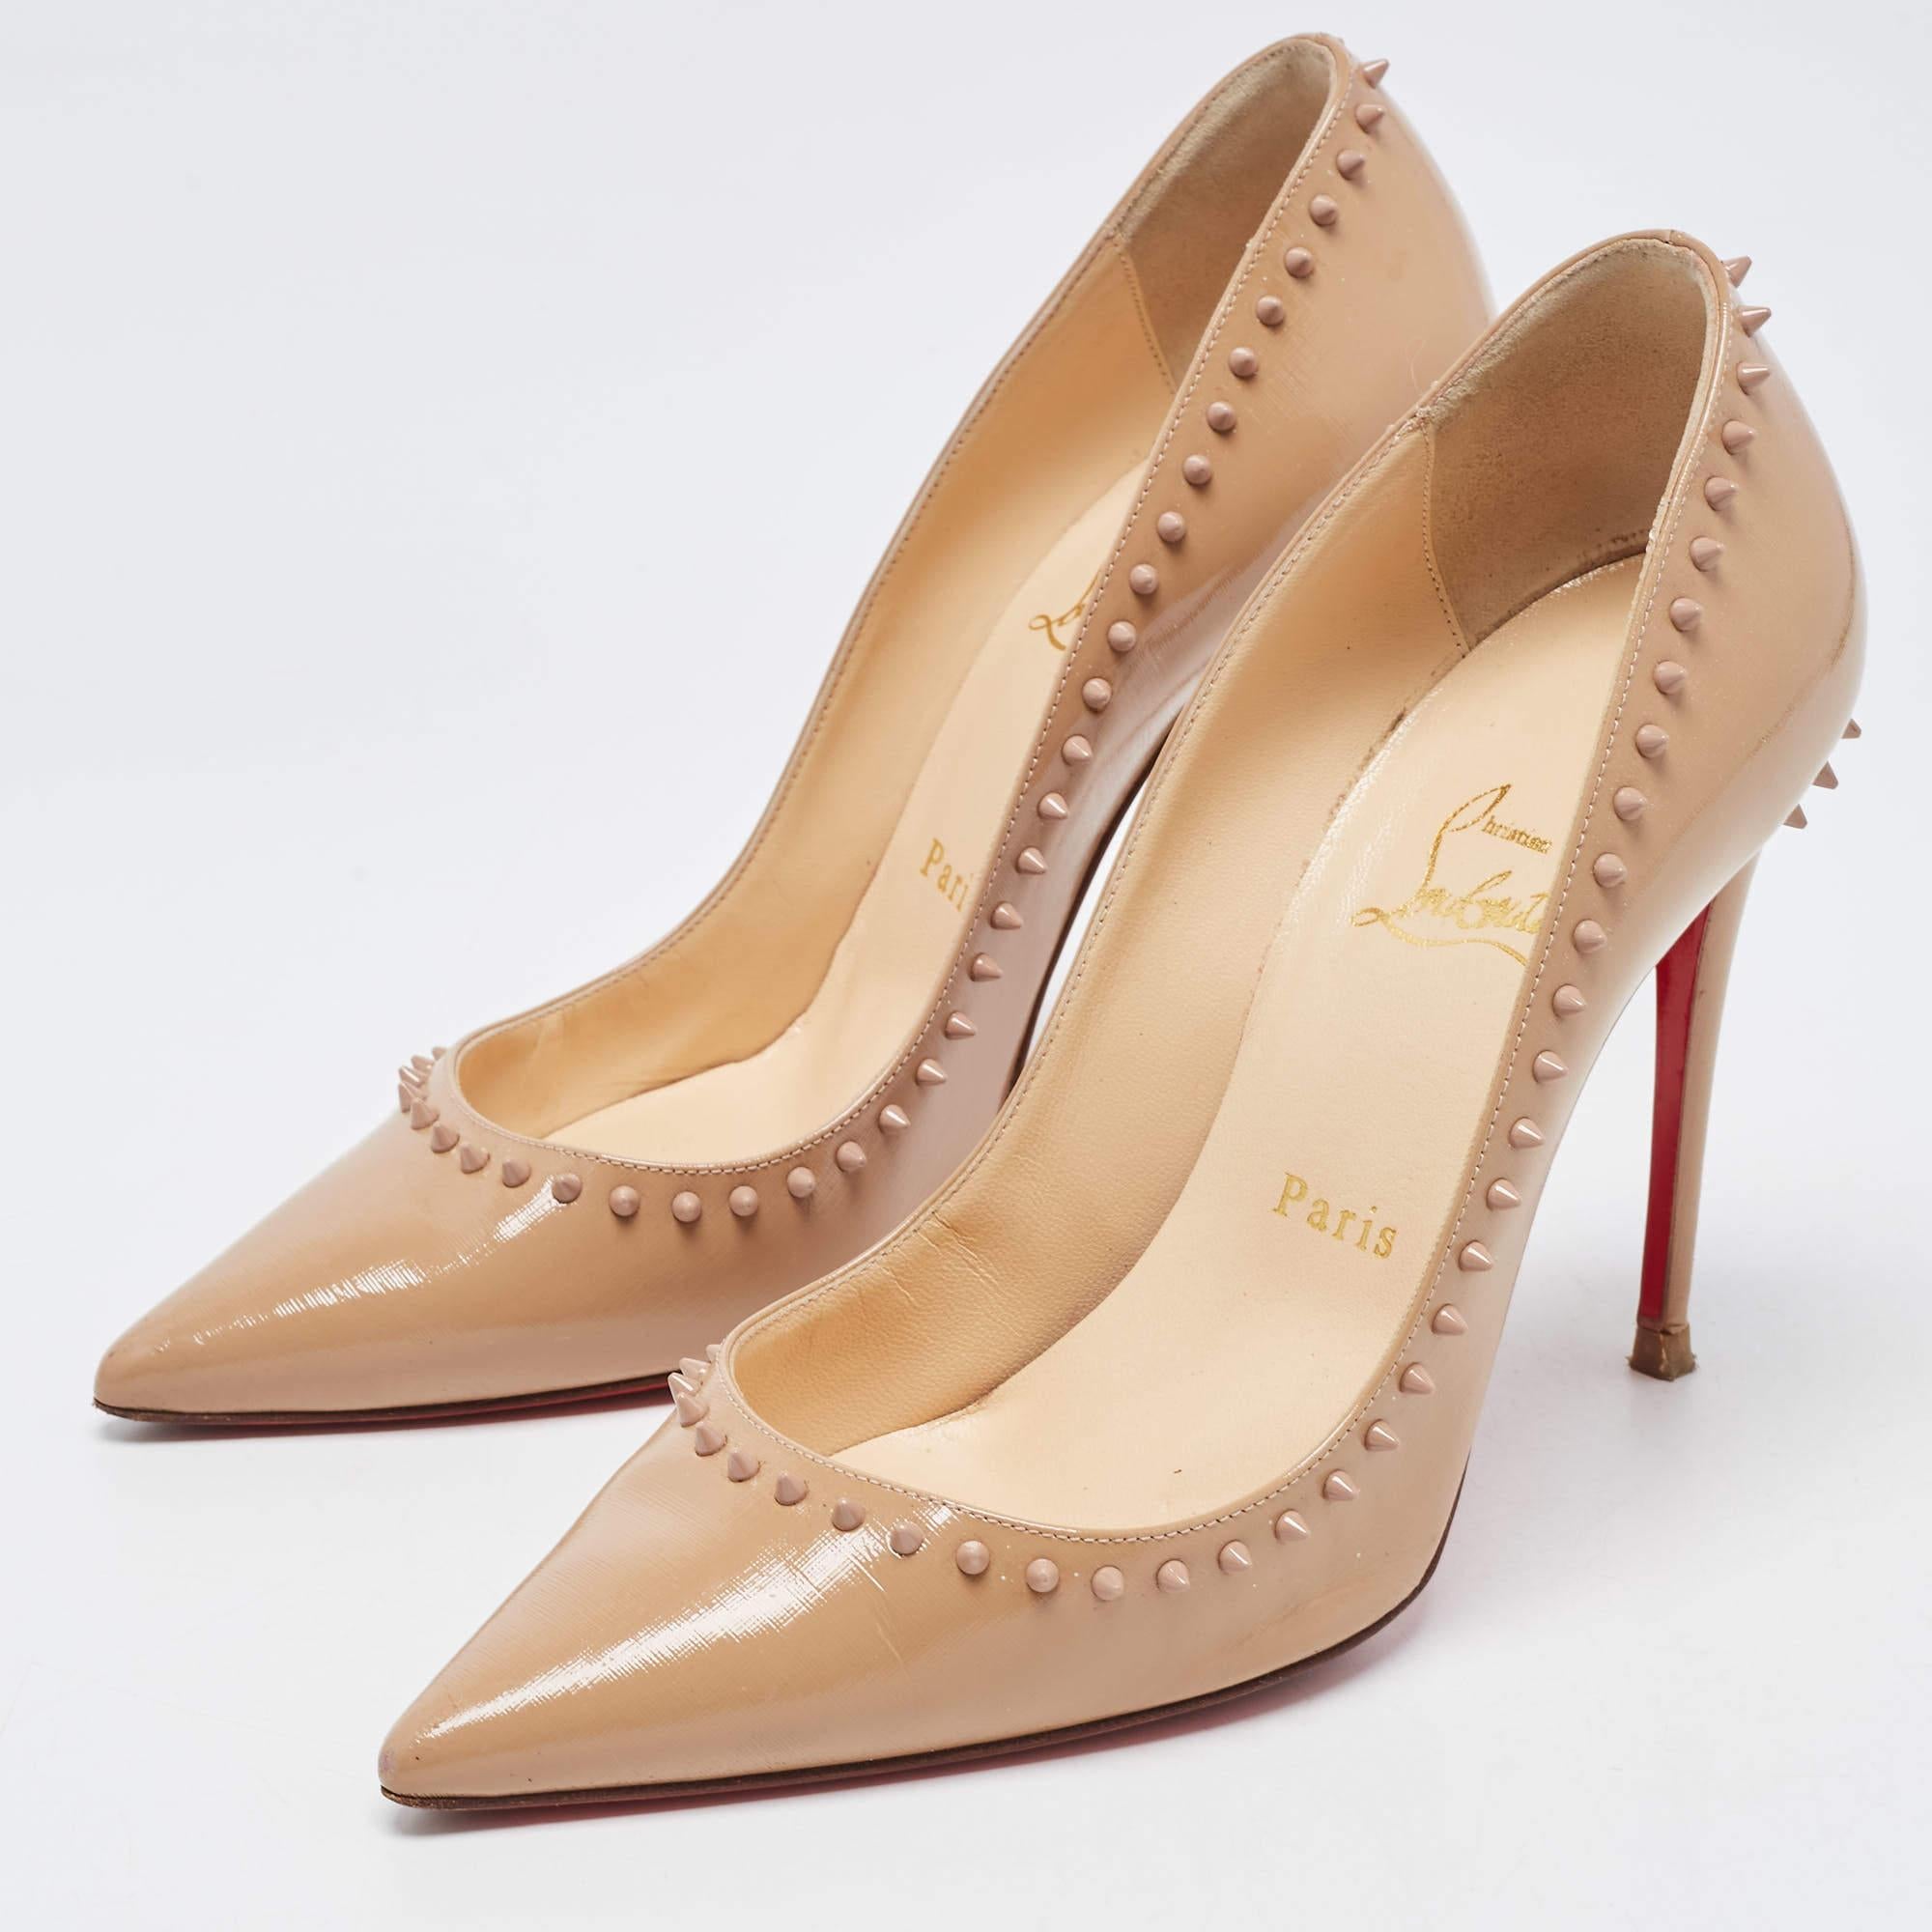 Women's Christian Louboutin Beige Patent Leather Anjalina Spike Pointed Toe Pumps Size 3 For Sale